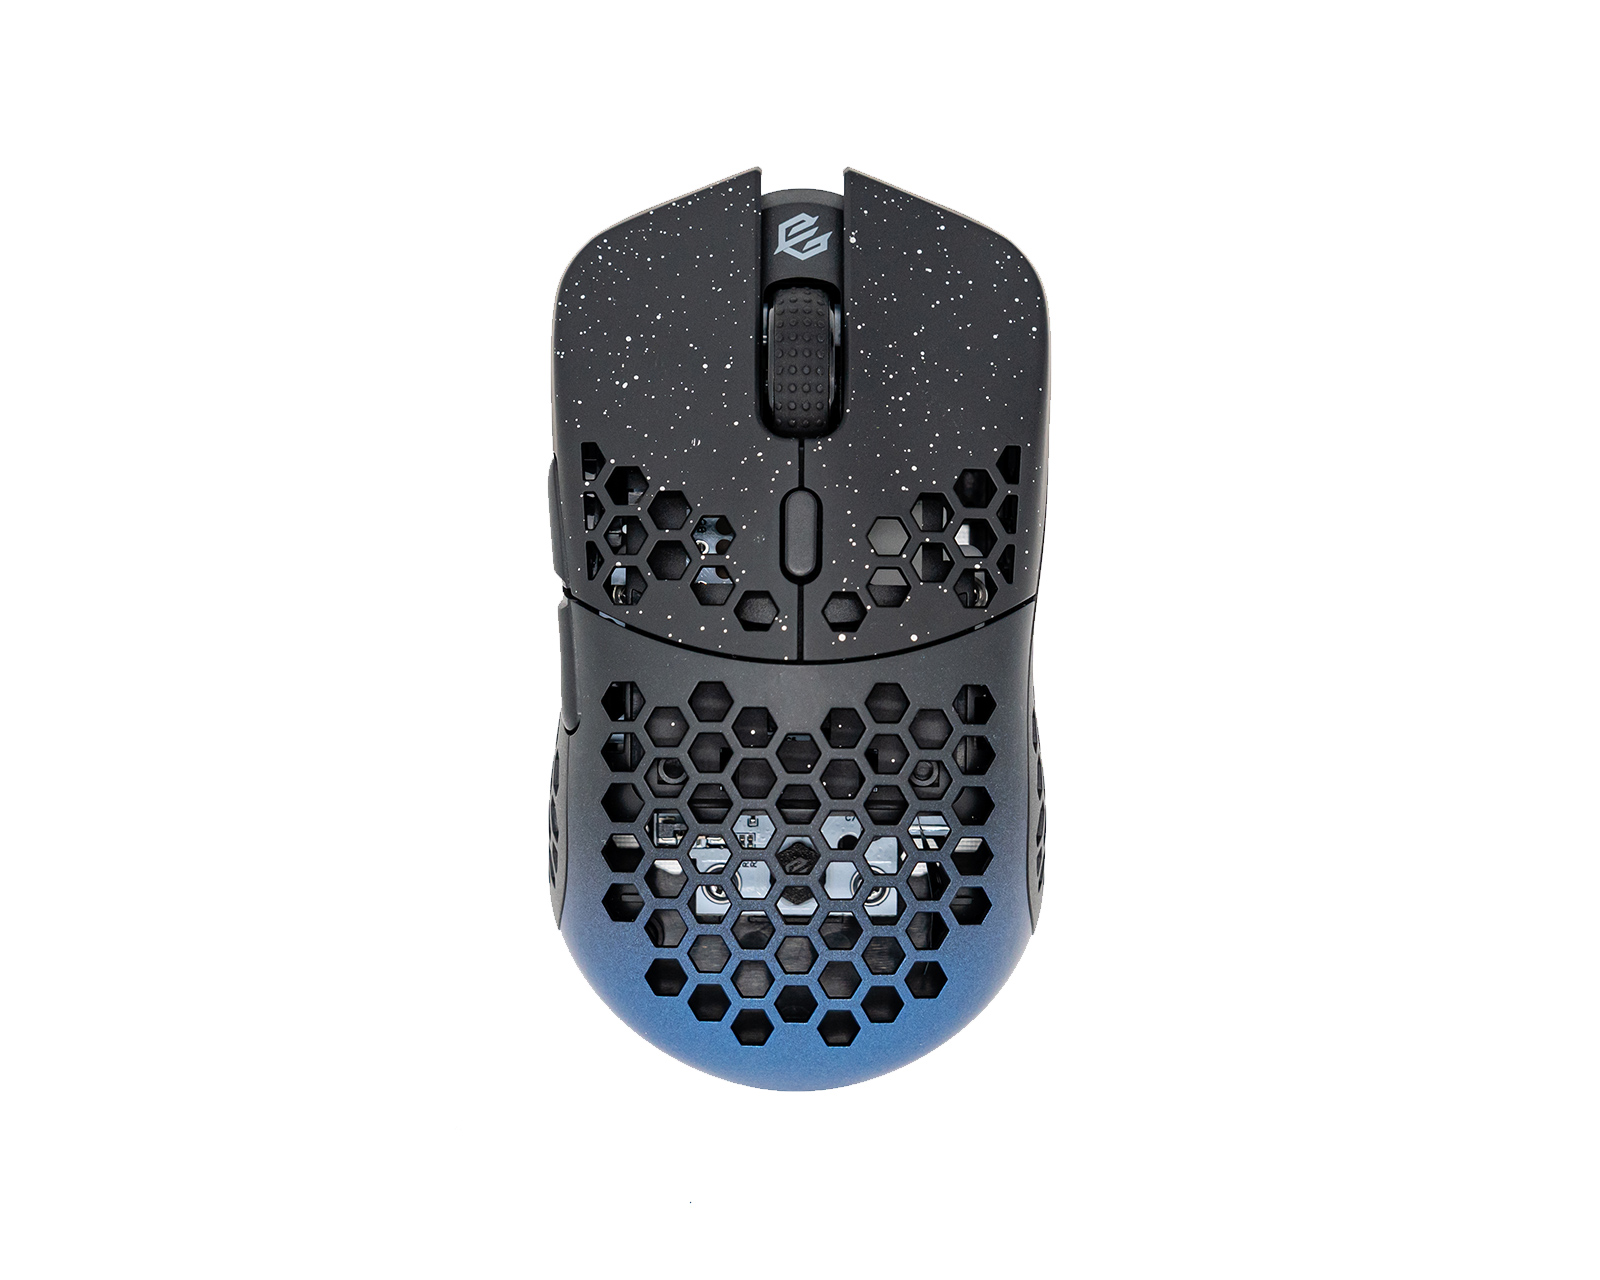 G-Wolves Hati S Wireless Gaming Mouse - Stardust Blue - us.MaxGaming.com